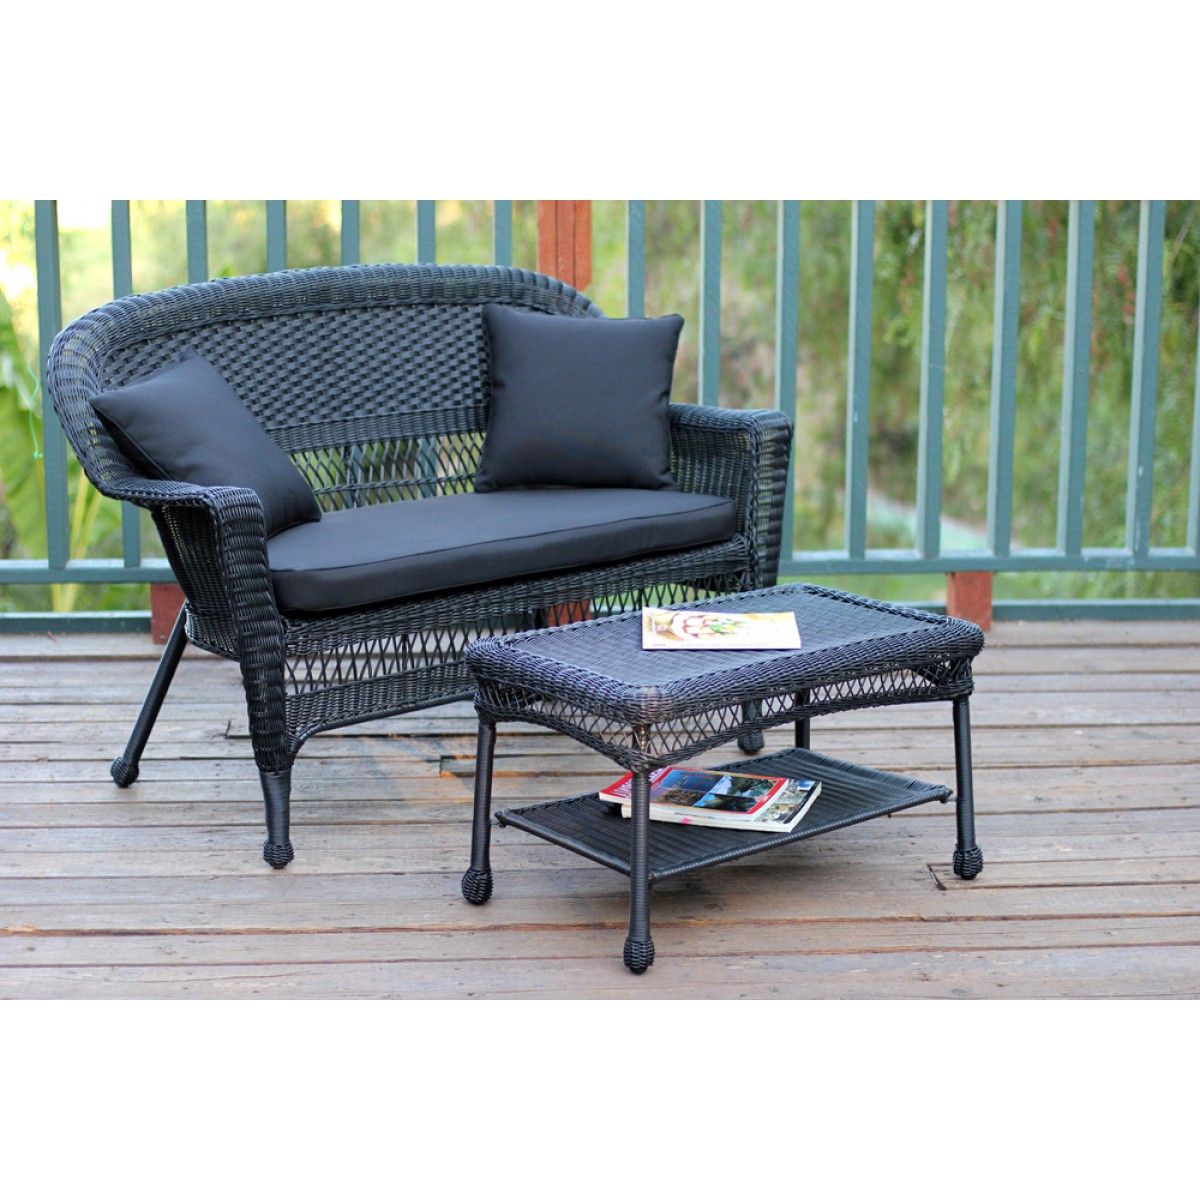 Latest Black And Tan Rattan Coffee Tables Pertaining To Black Wicker Patio Love Seat And Coffee Table Set With (View 10 of 20)